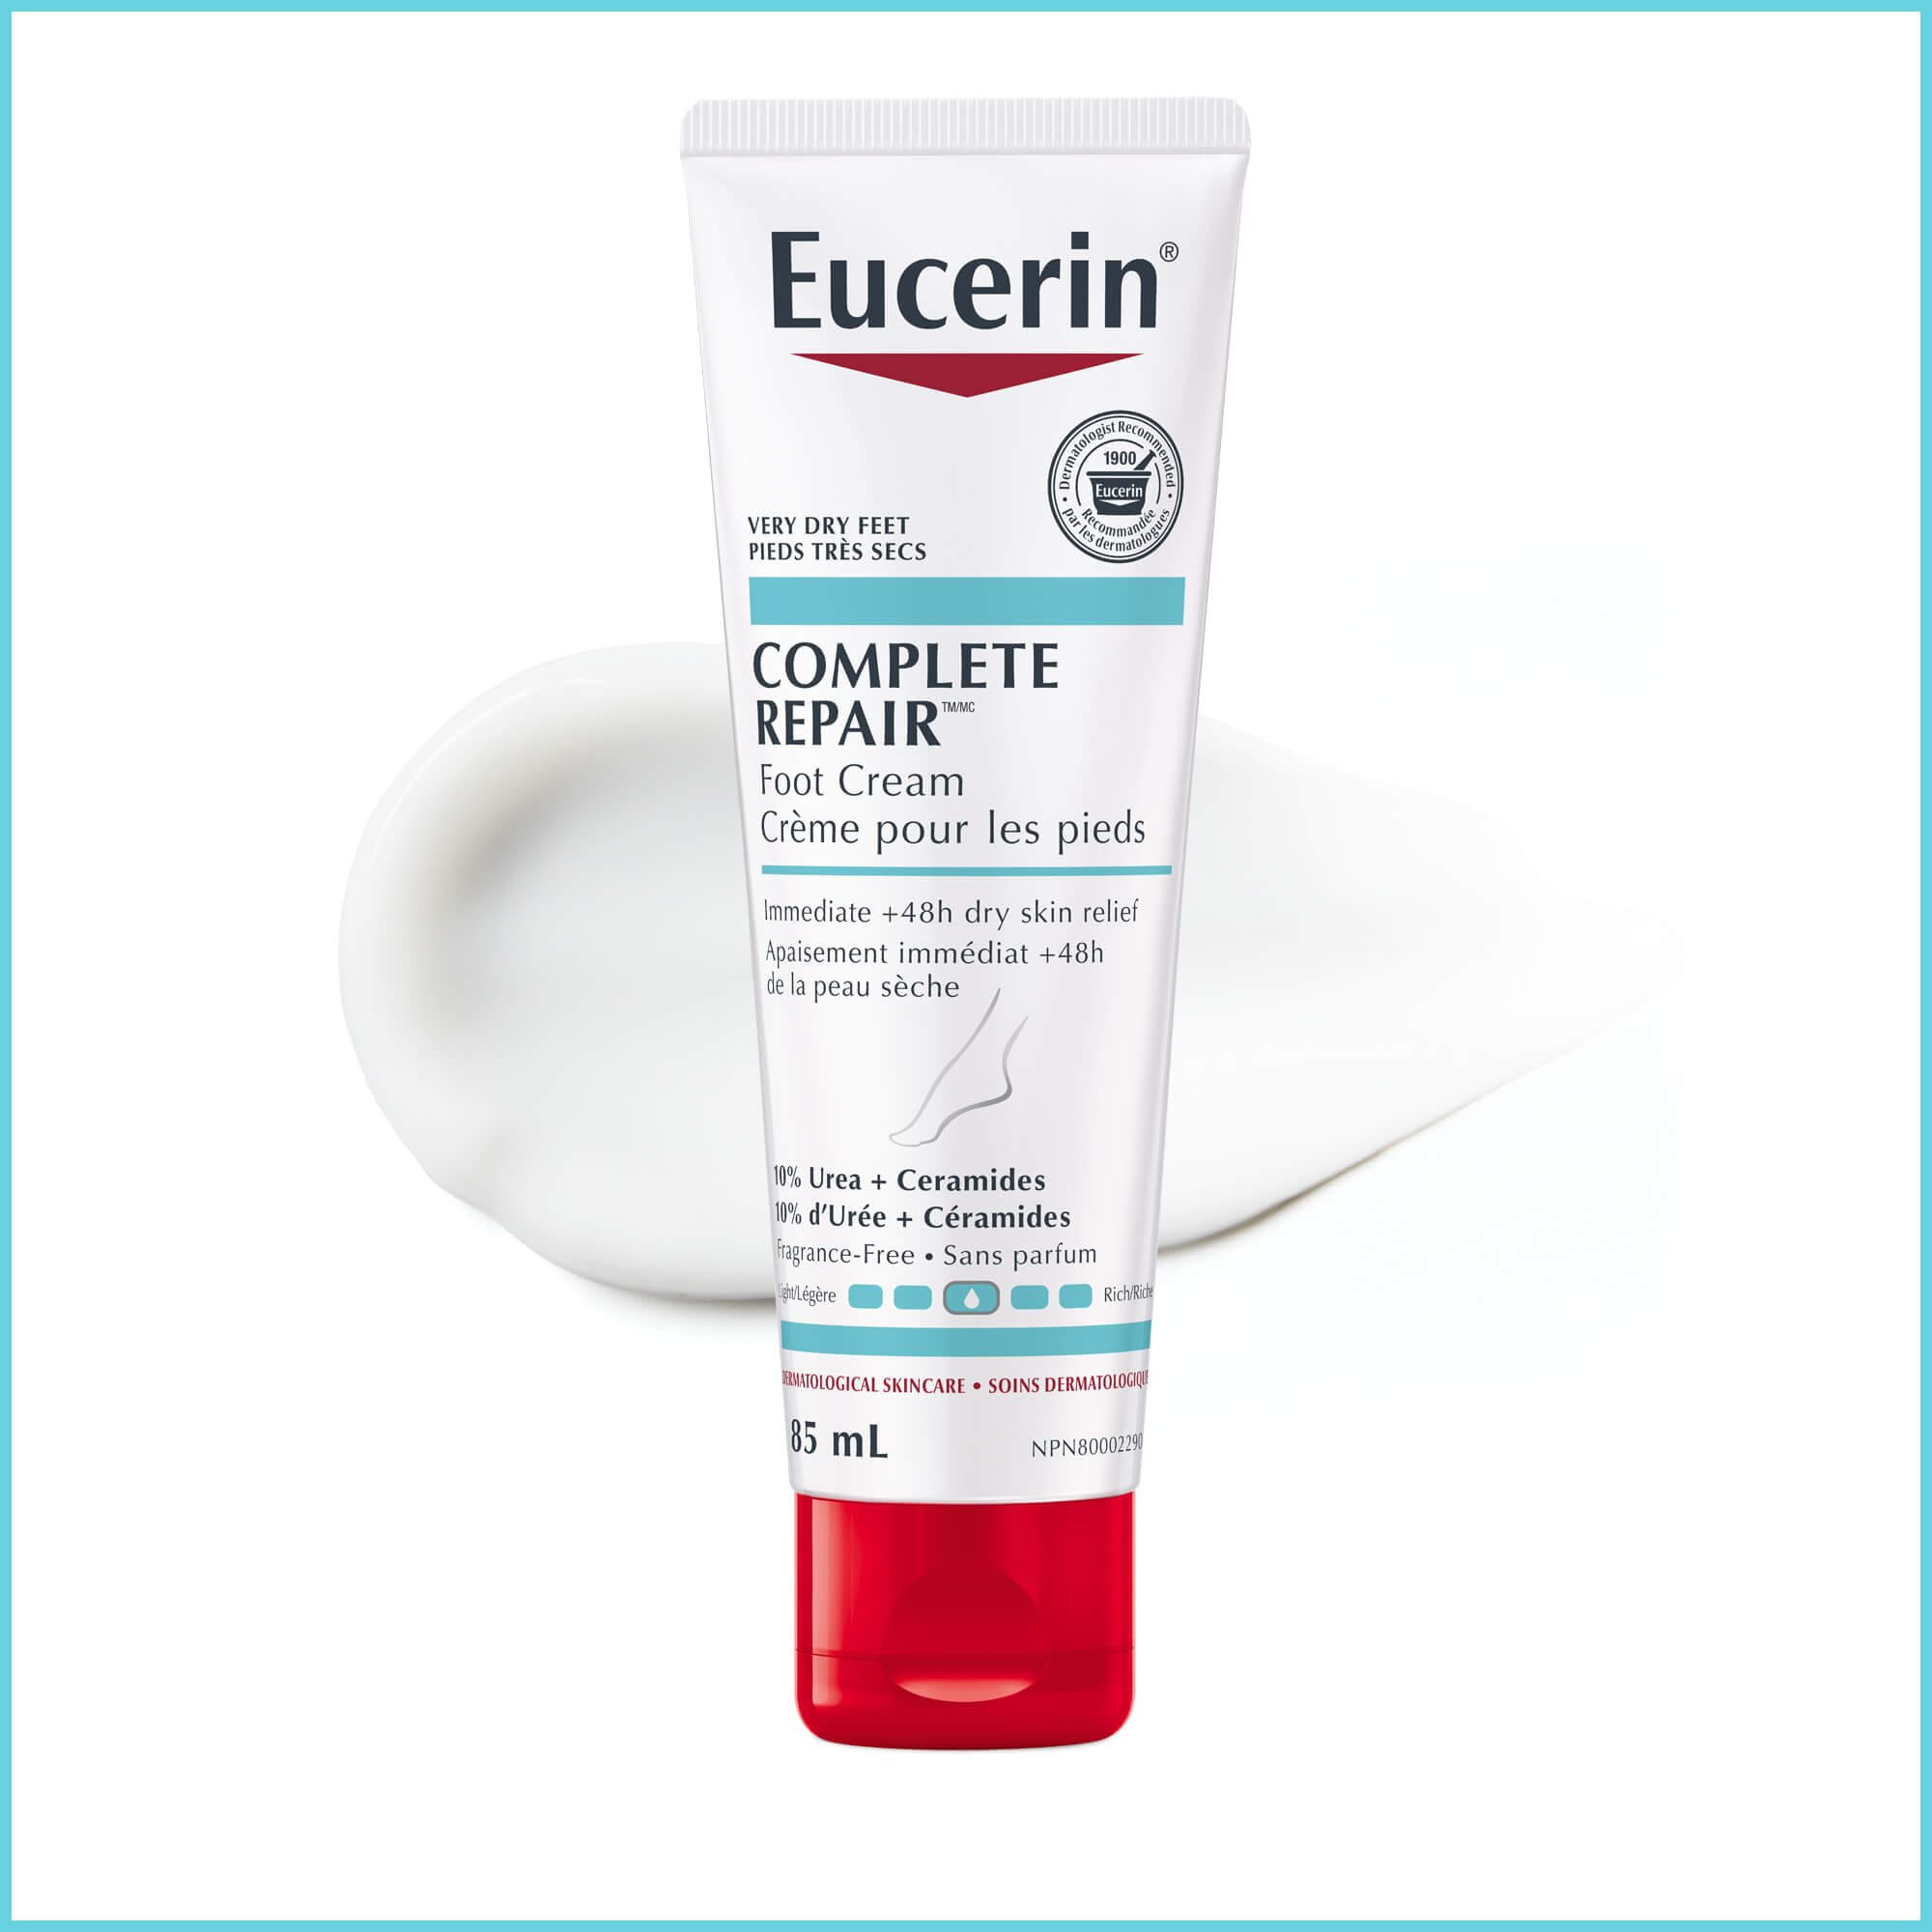 Image of the Eucerin Complete Repair Foot Cream laying against a white background with product spread behind it.